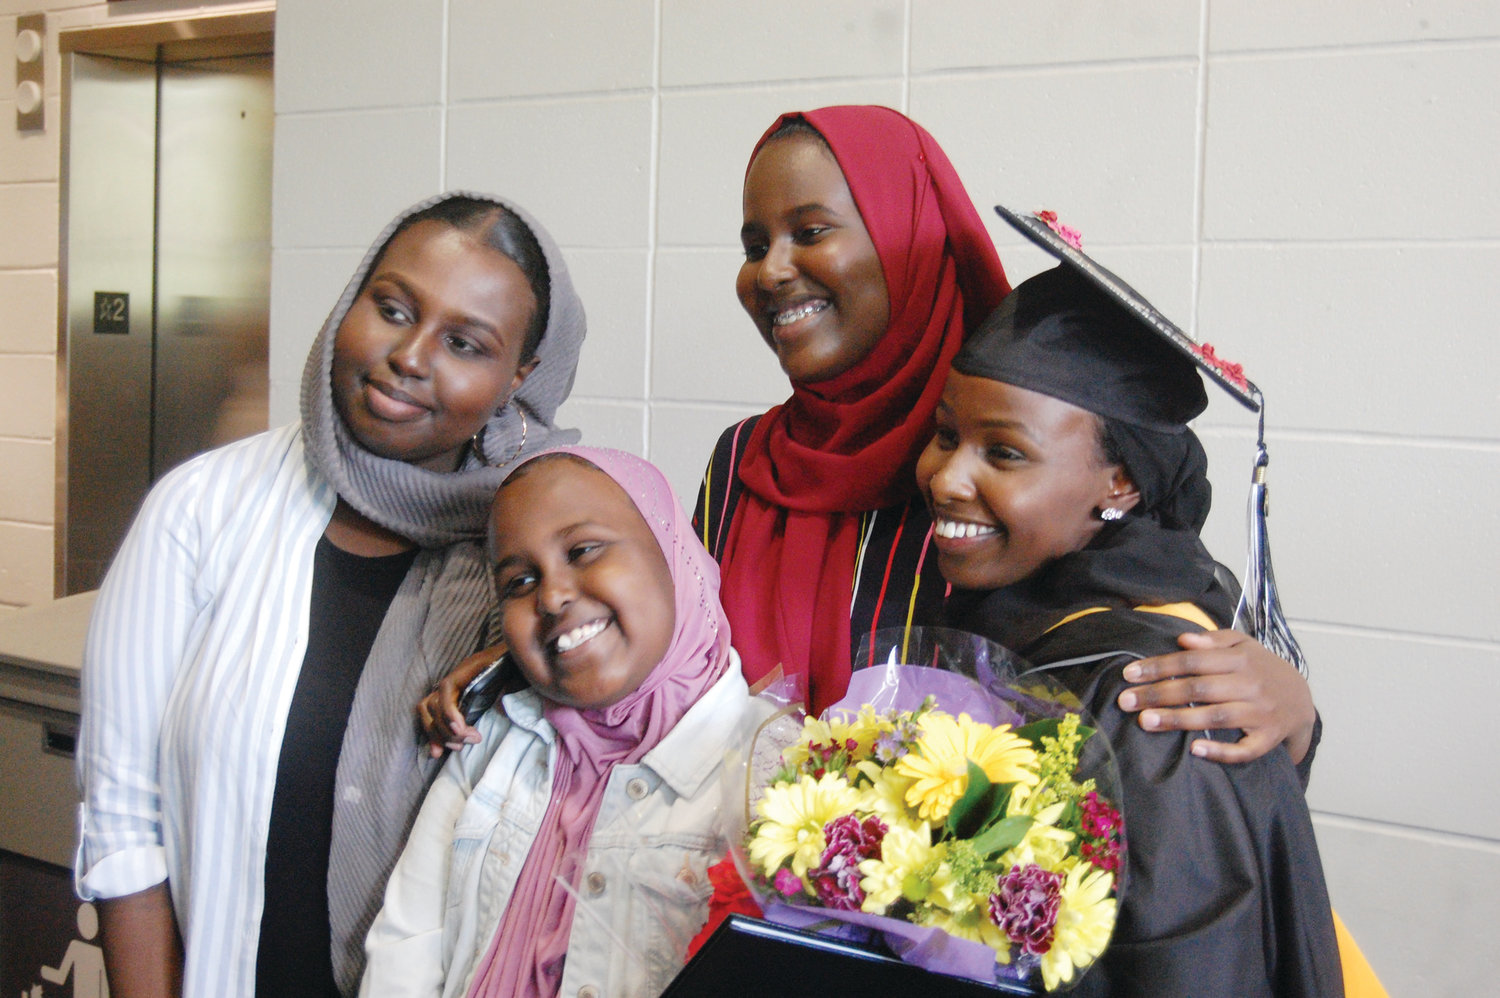 Fartun Abdulle, of Lawrence, Mass., smiles with her sisters, from left to right: Fardowsa, Aisha and Maka following graduation from Providence College.